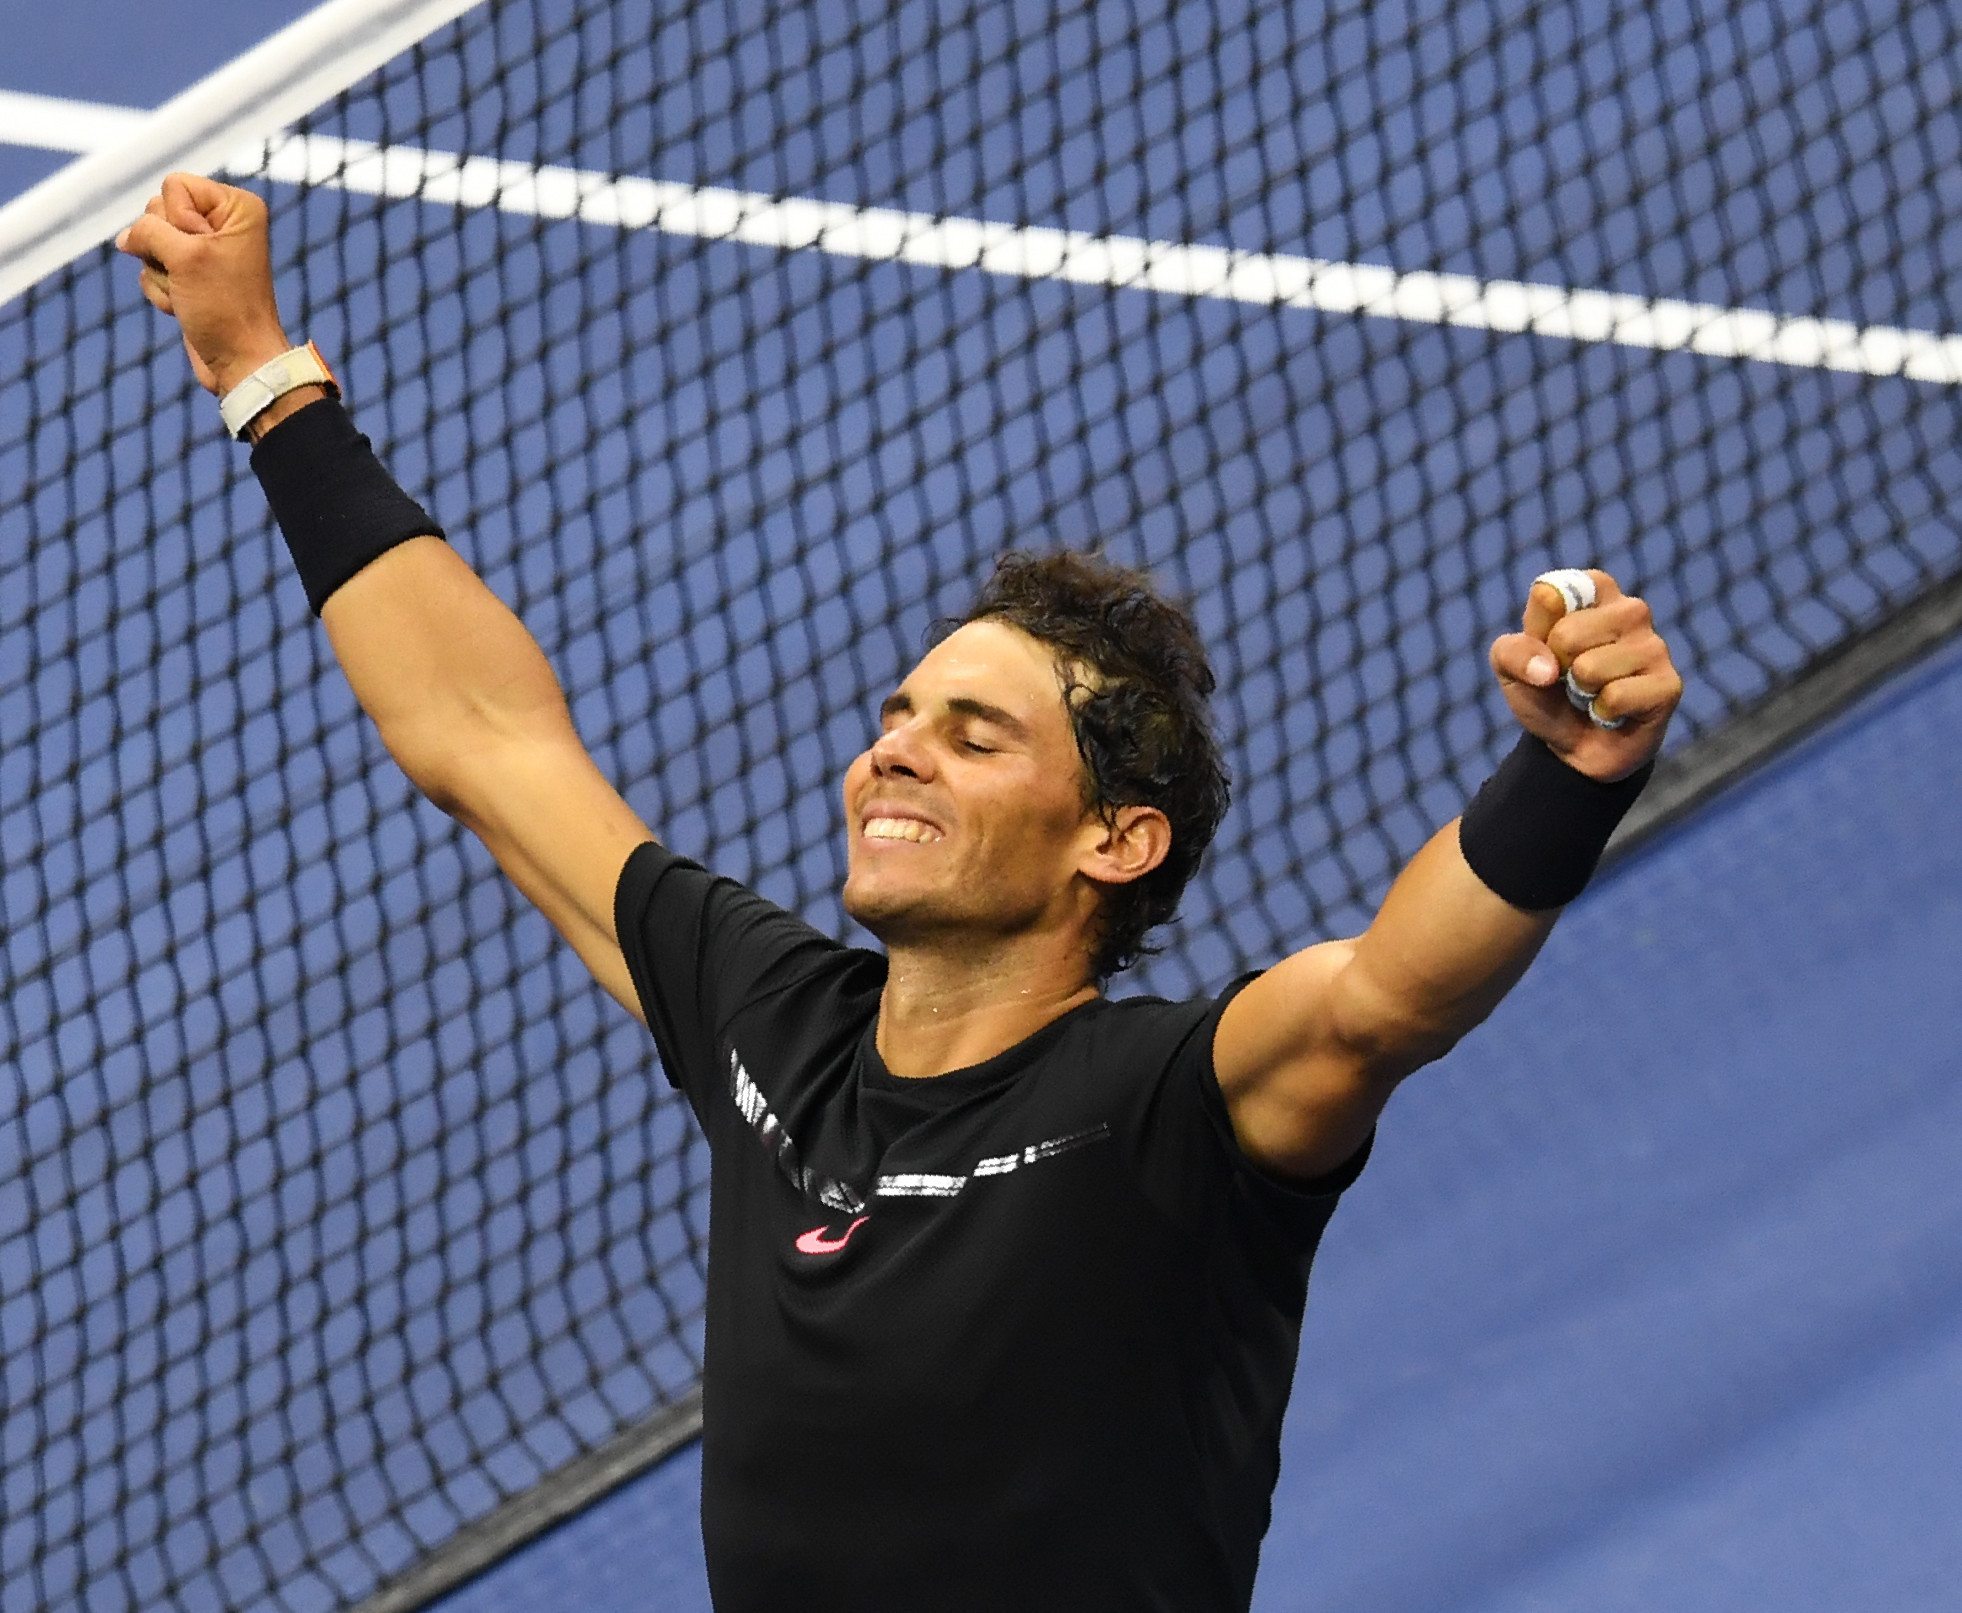 Nadal beats Del Potro to set up US Open final with Anderson